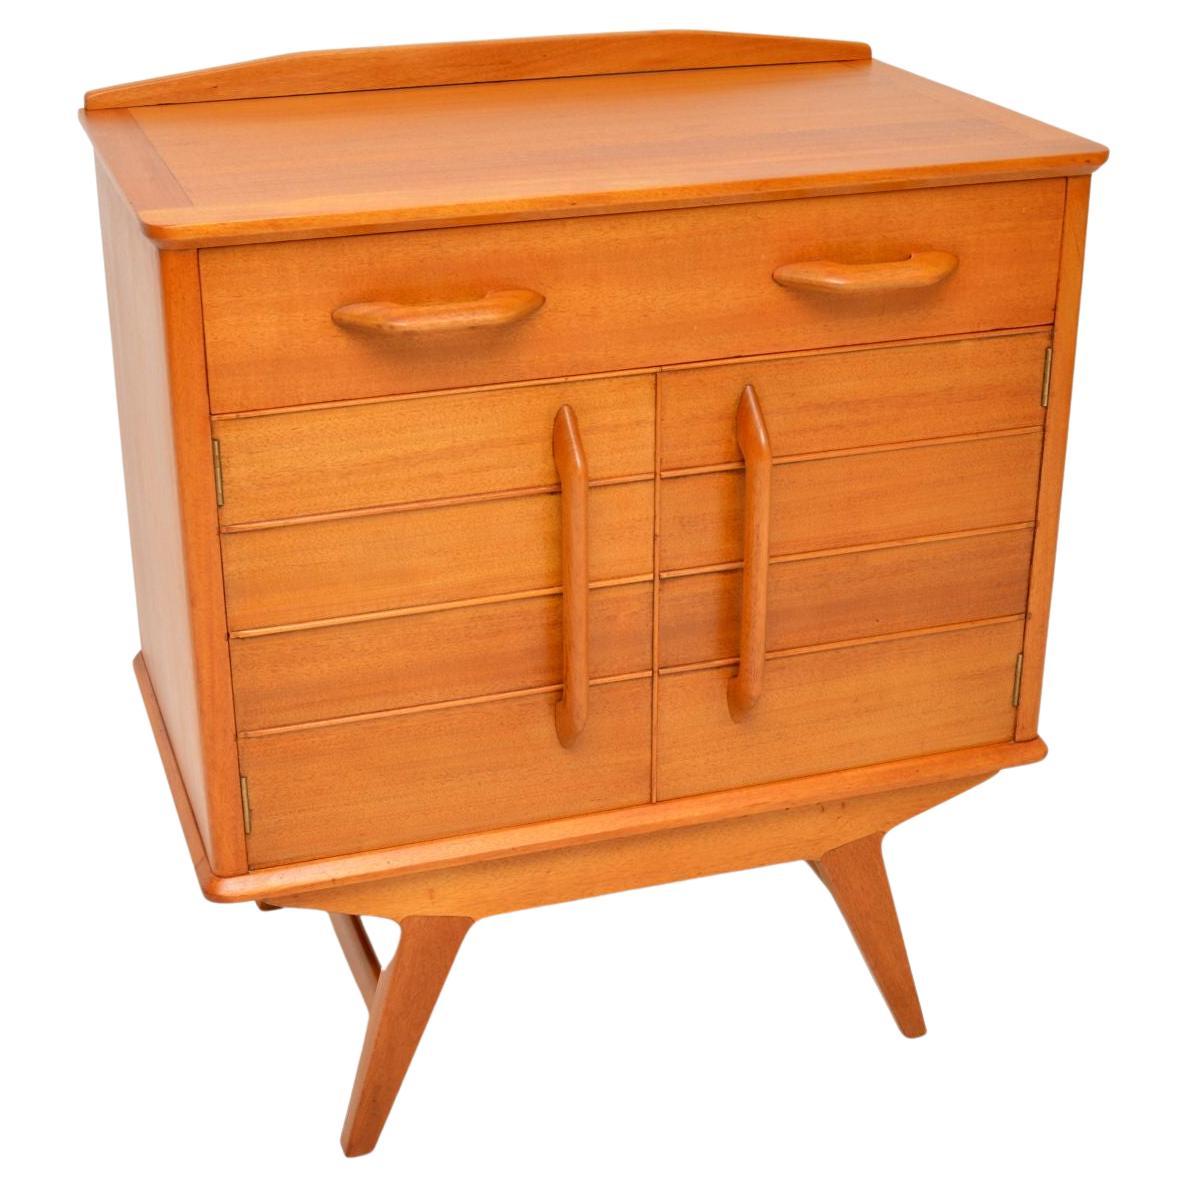 A very stylish and quite rare bureau dating from the early 1950’s. This was made in England by E Gomme, which a short time after became G Plan.

It is of superb quality and has a very useful design. It sits on beautifully splayed legs, contains a